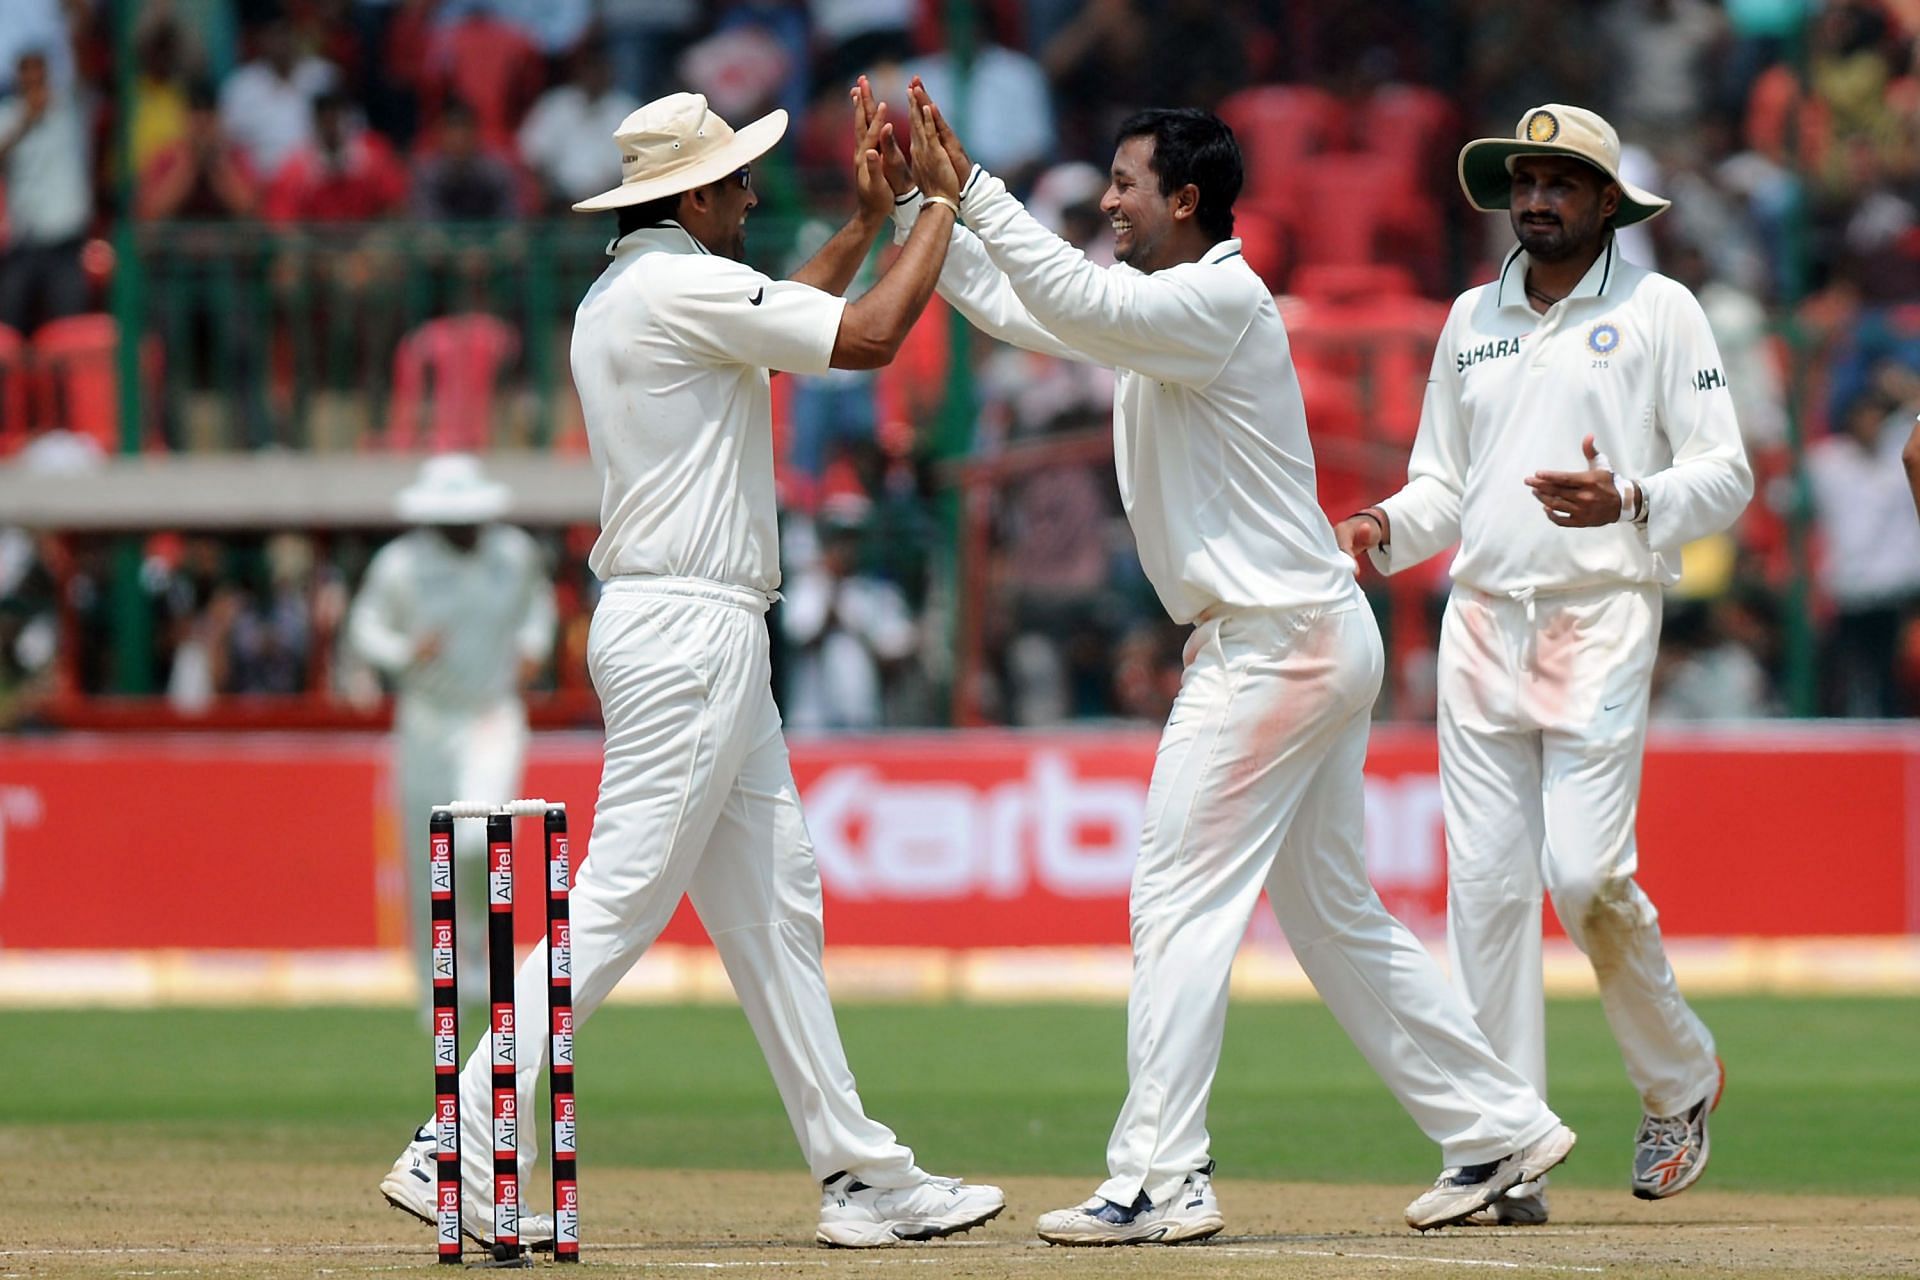 Former Indian cricketer Pragyan Ojha celebrates a wicket. Pic: Getty Images